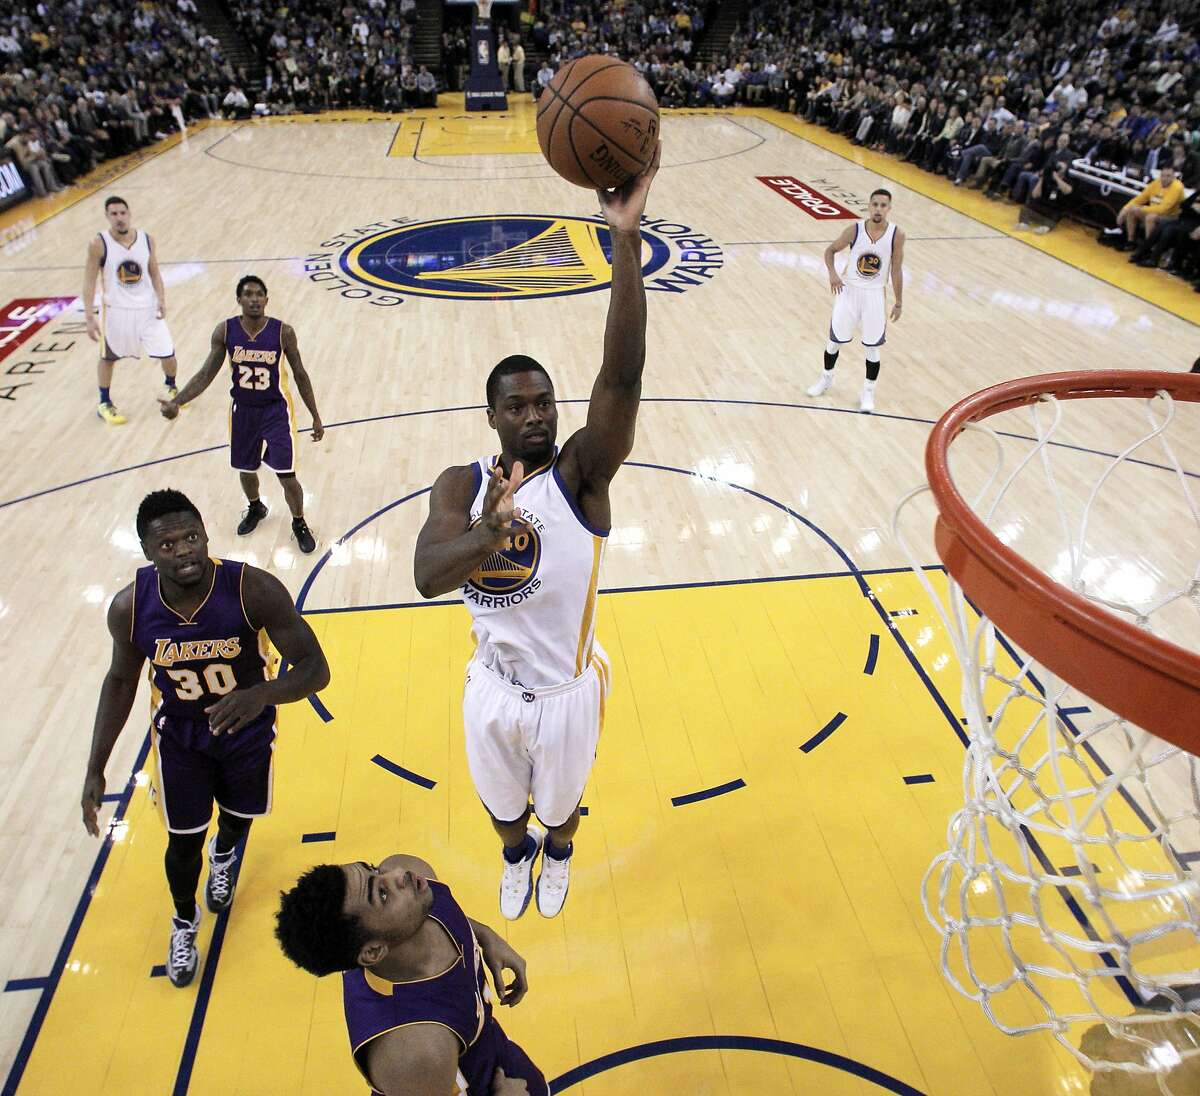 Harrison Barnes (40) shoots in the first half the Golden State Warriors played against the Los Angeles Lakers at Oracle Arena in Oakland, Calif., on Thursday, January 14, 2016.